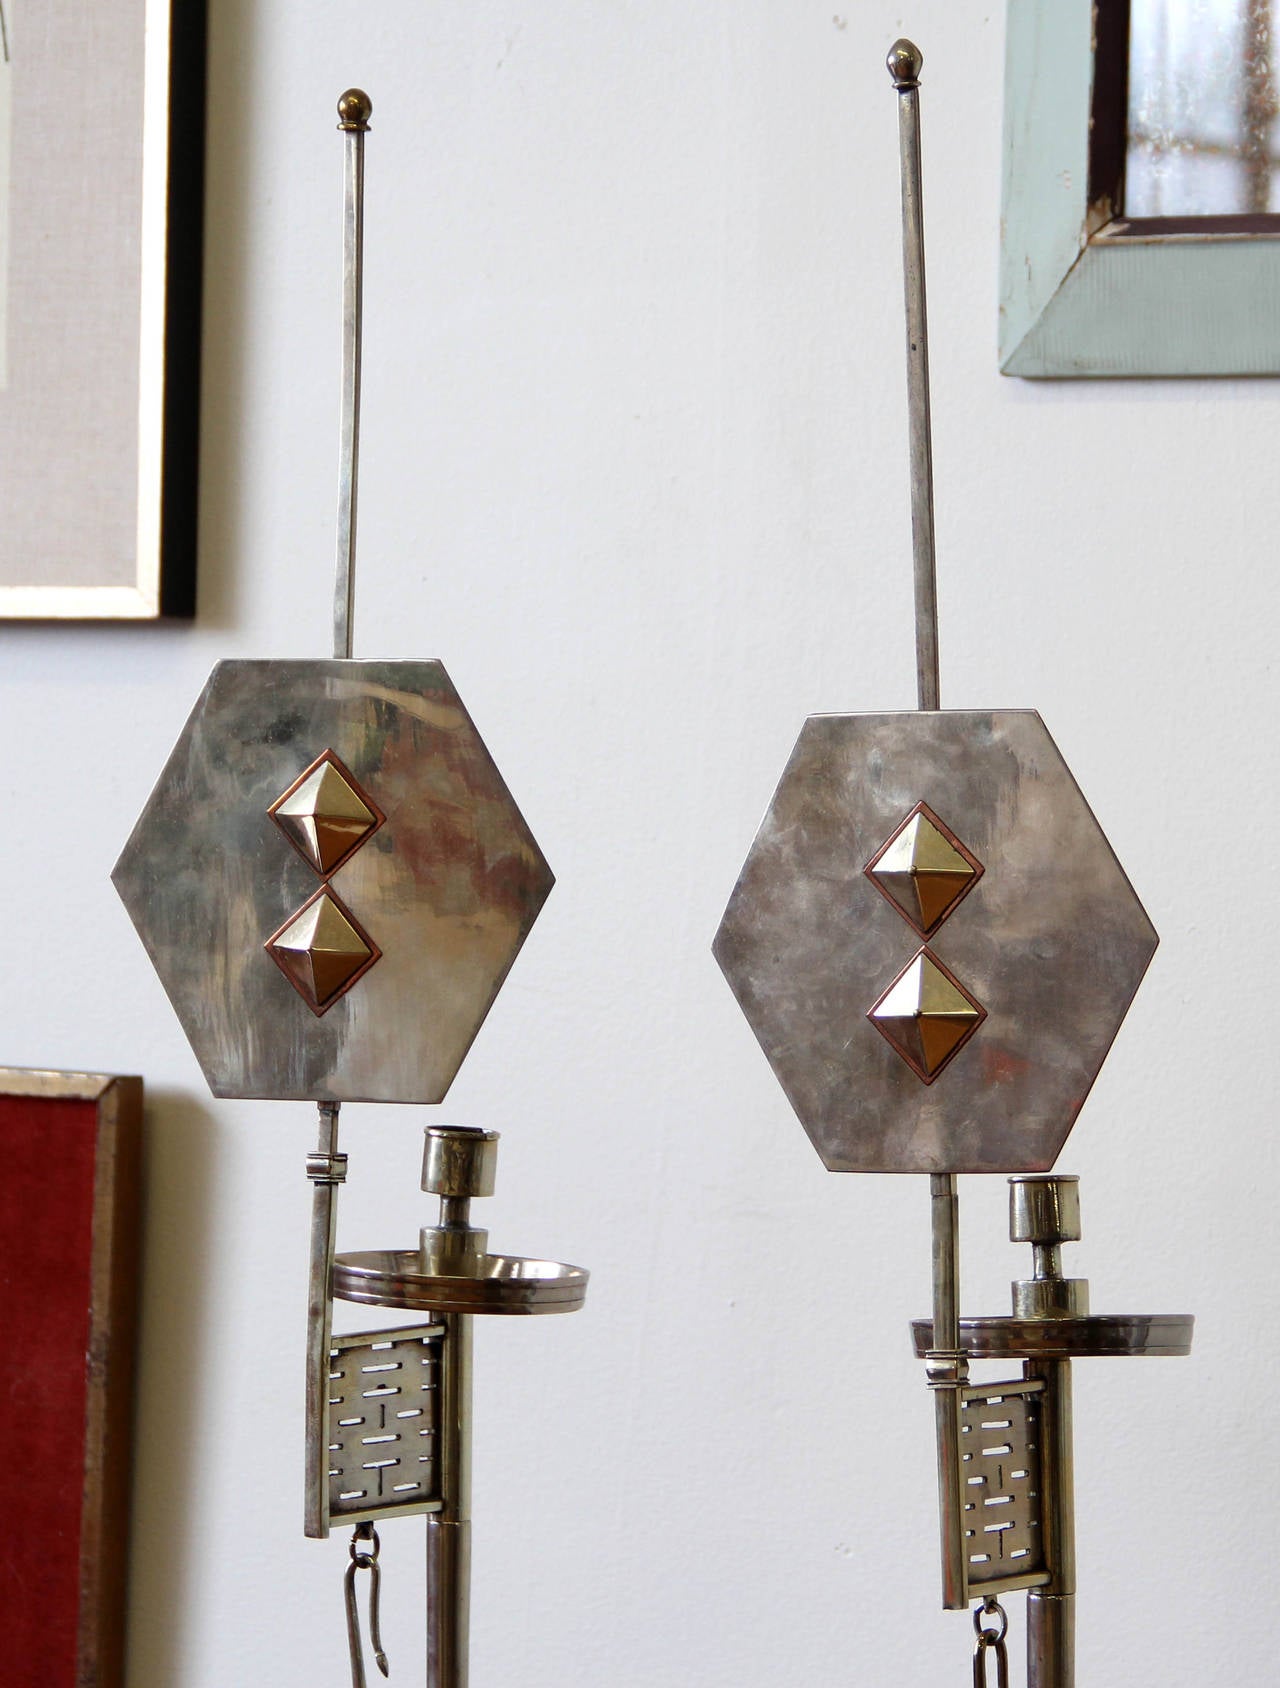 This is a rare pair of adjustable antique Japanese nickel-silver candle holders with hanging wick trimmers circa 1900-1910. The pair were gifted to Dr. William S. Fulton (1873-1938) while on a grand tour of Asian countries. Dr. Fulton was the